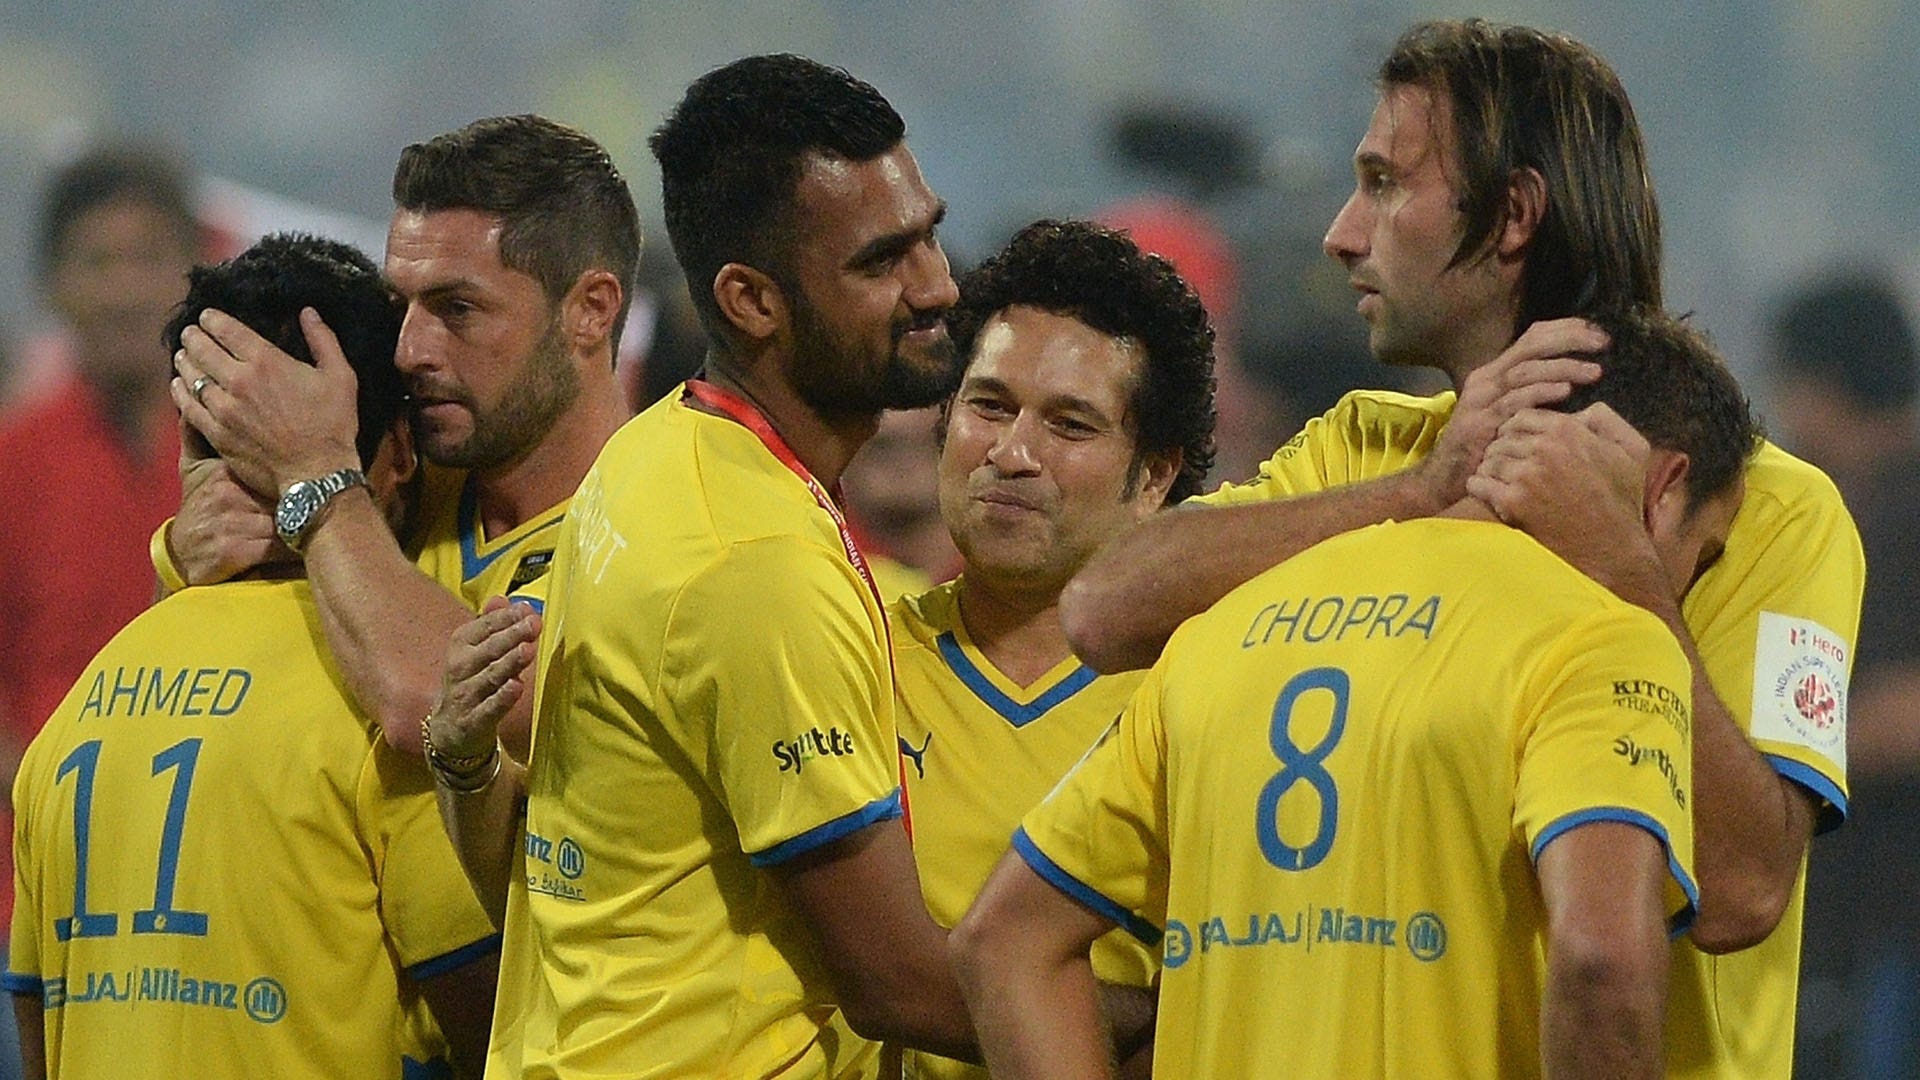 Sachin Tendulkar interacts with Kerala Blasters players after they lost ISL final match against Atletico de Kolkata